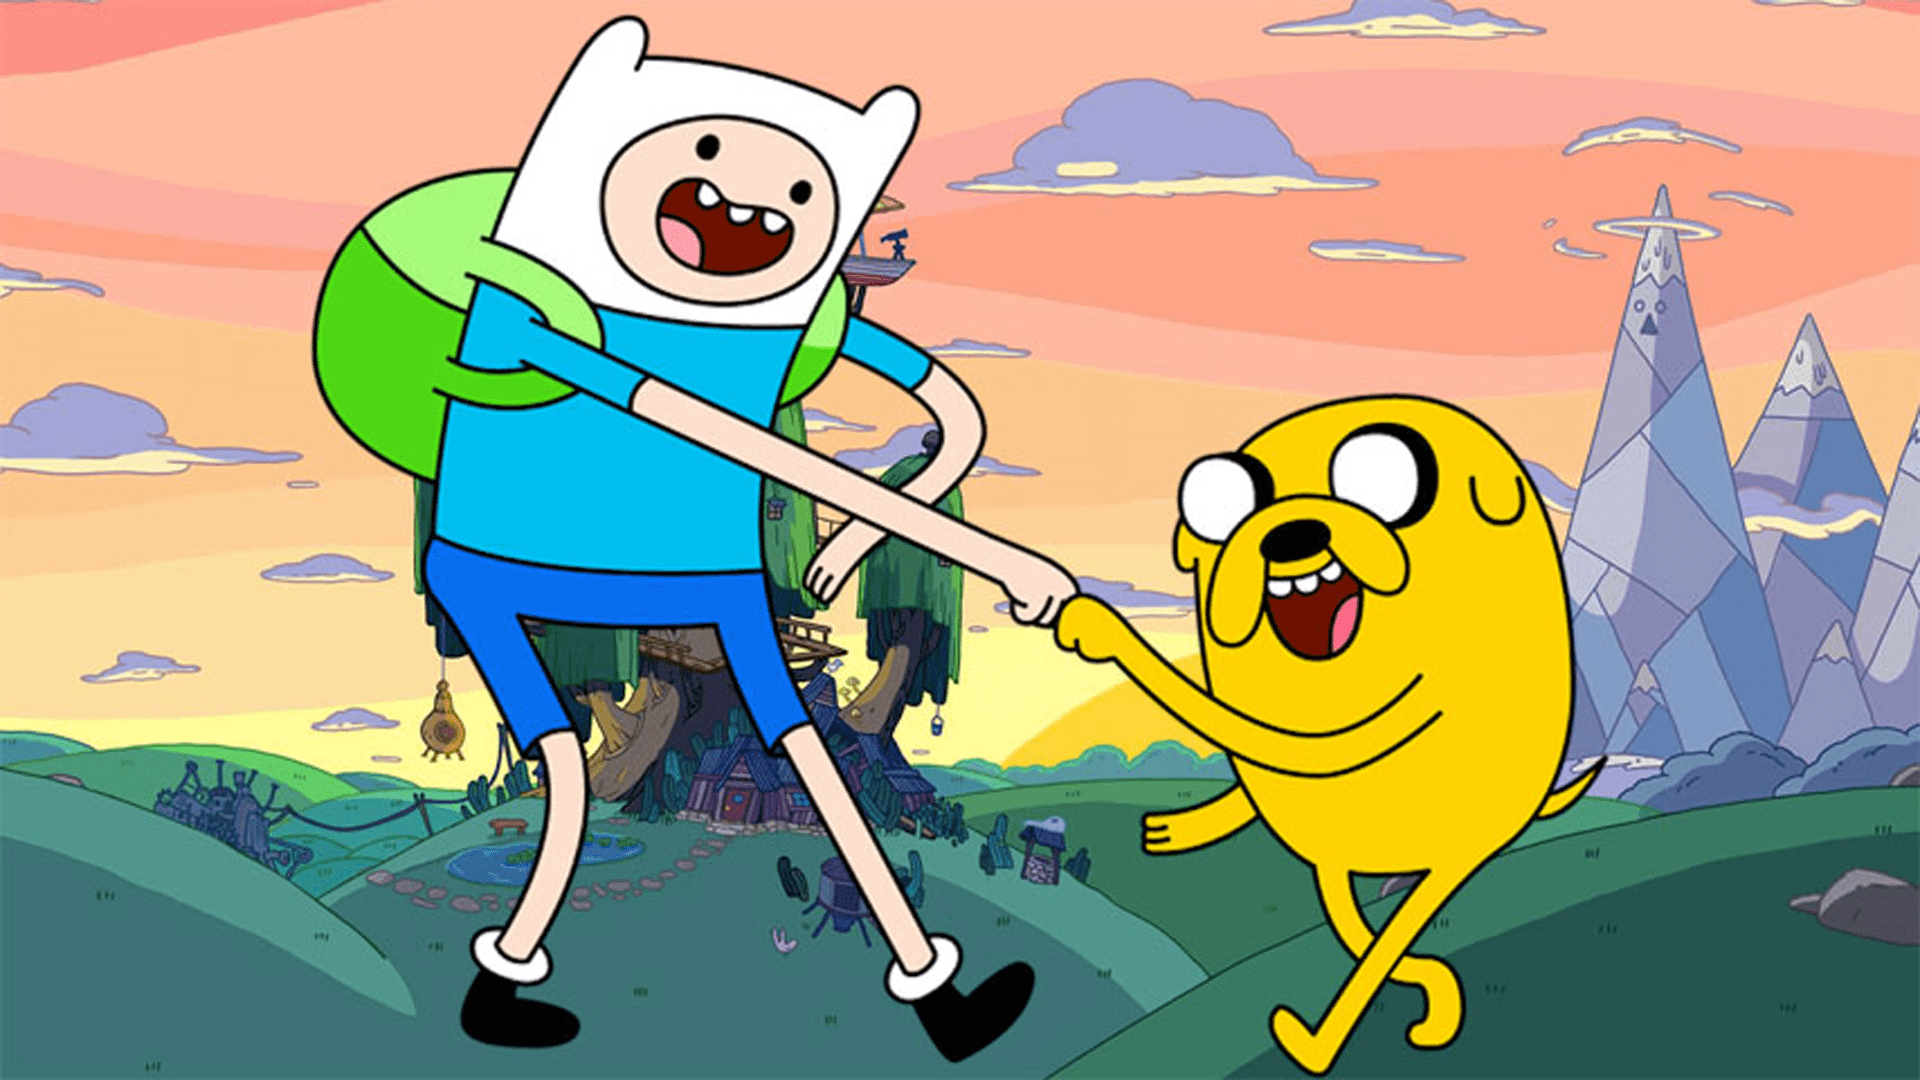 It's Pirate 'Adventure Time' with Jake and Finn this July